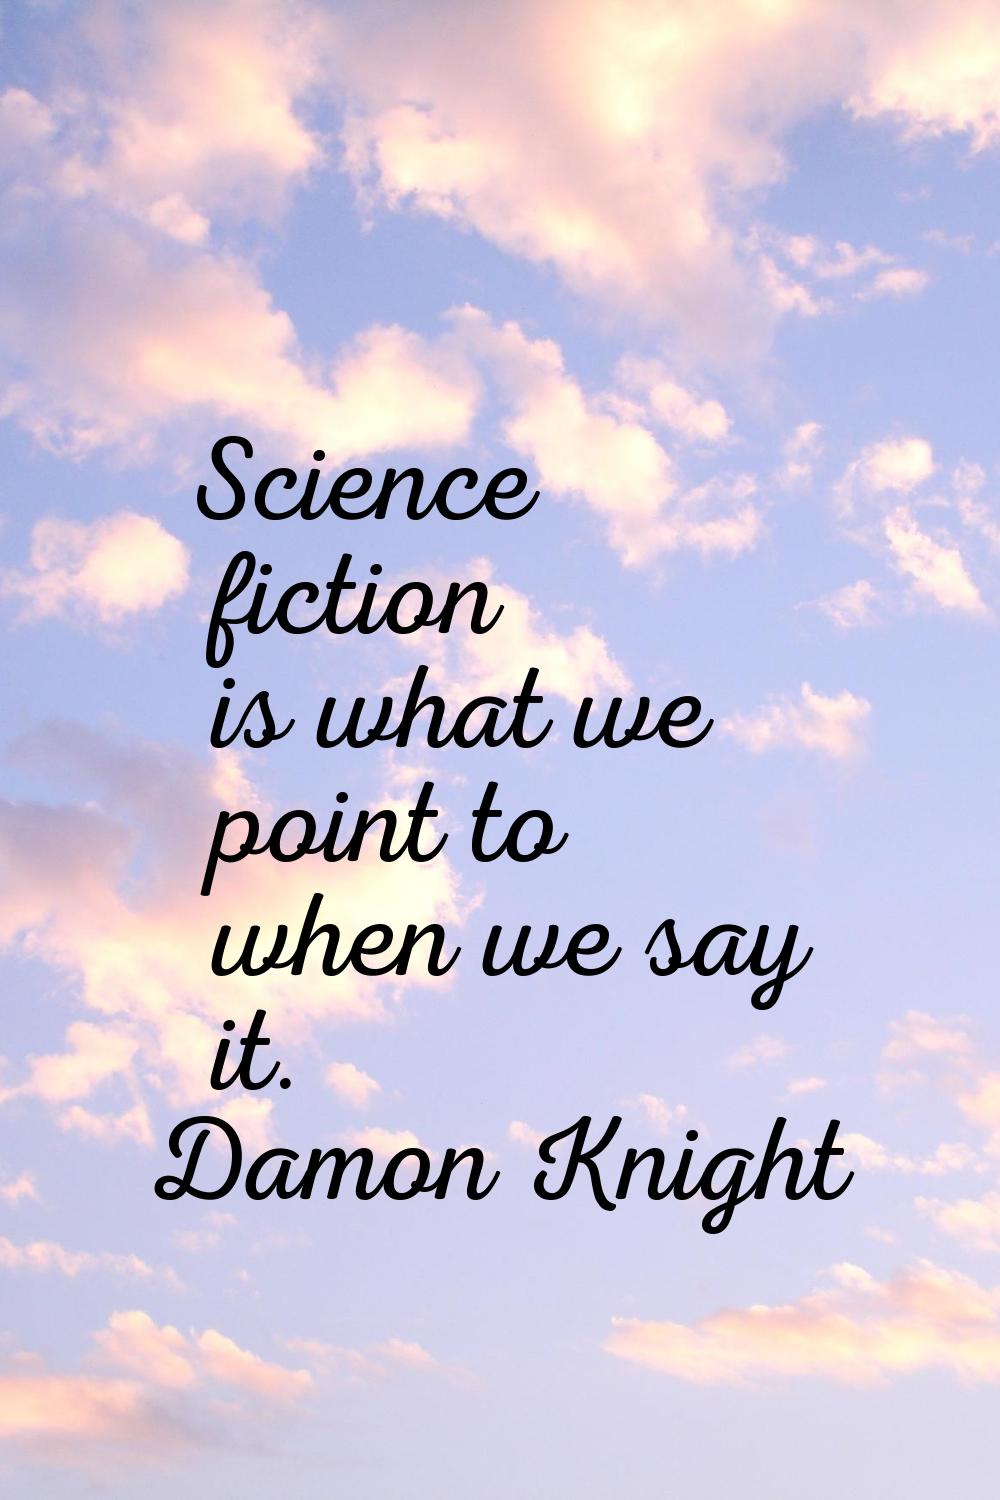 Science fiction is what we point to when we say it.